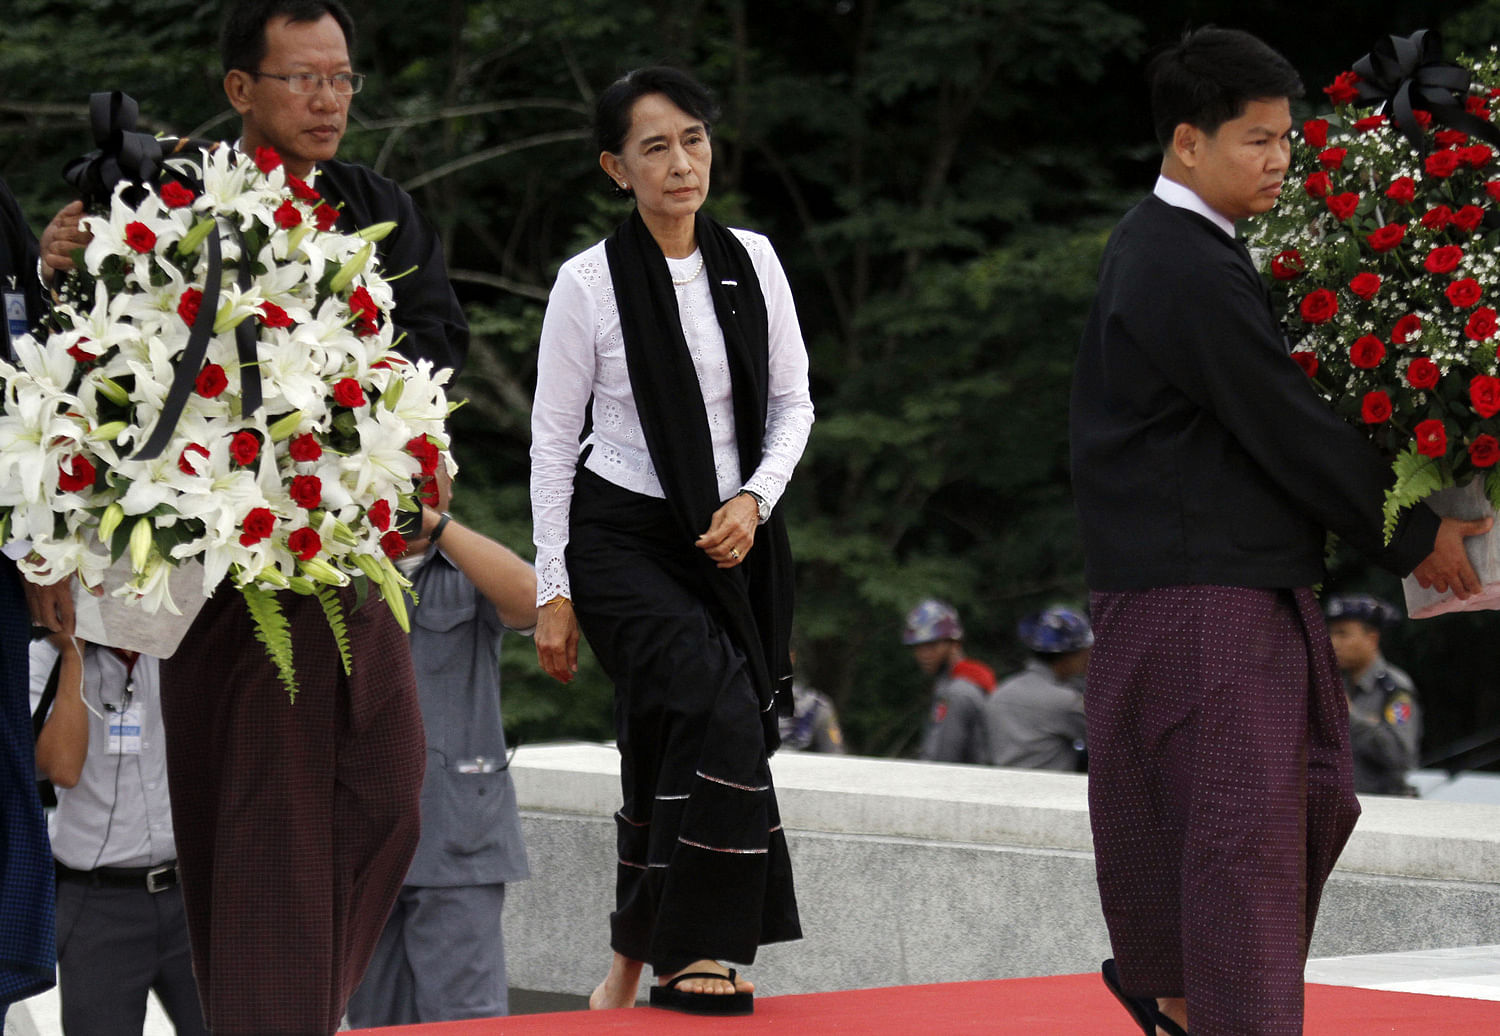 Myanmar opposition leader Aung San Suu Kyi, center, arrives to lay flowers at the tomb of her late father Gen. Aung San during a ceremony to mark the 65th anniversary of his 1947 assassination, at the Martyrs' Mausoleum in Yangon, Myanmar on Thursday...